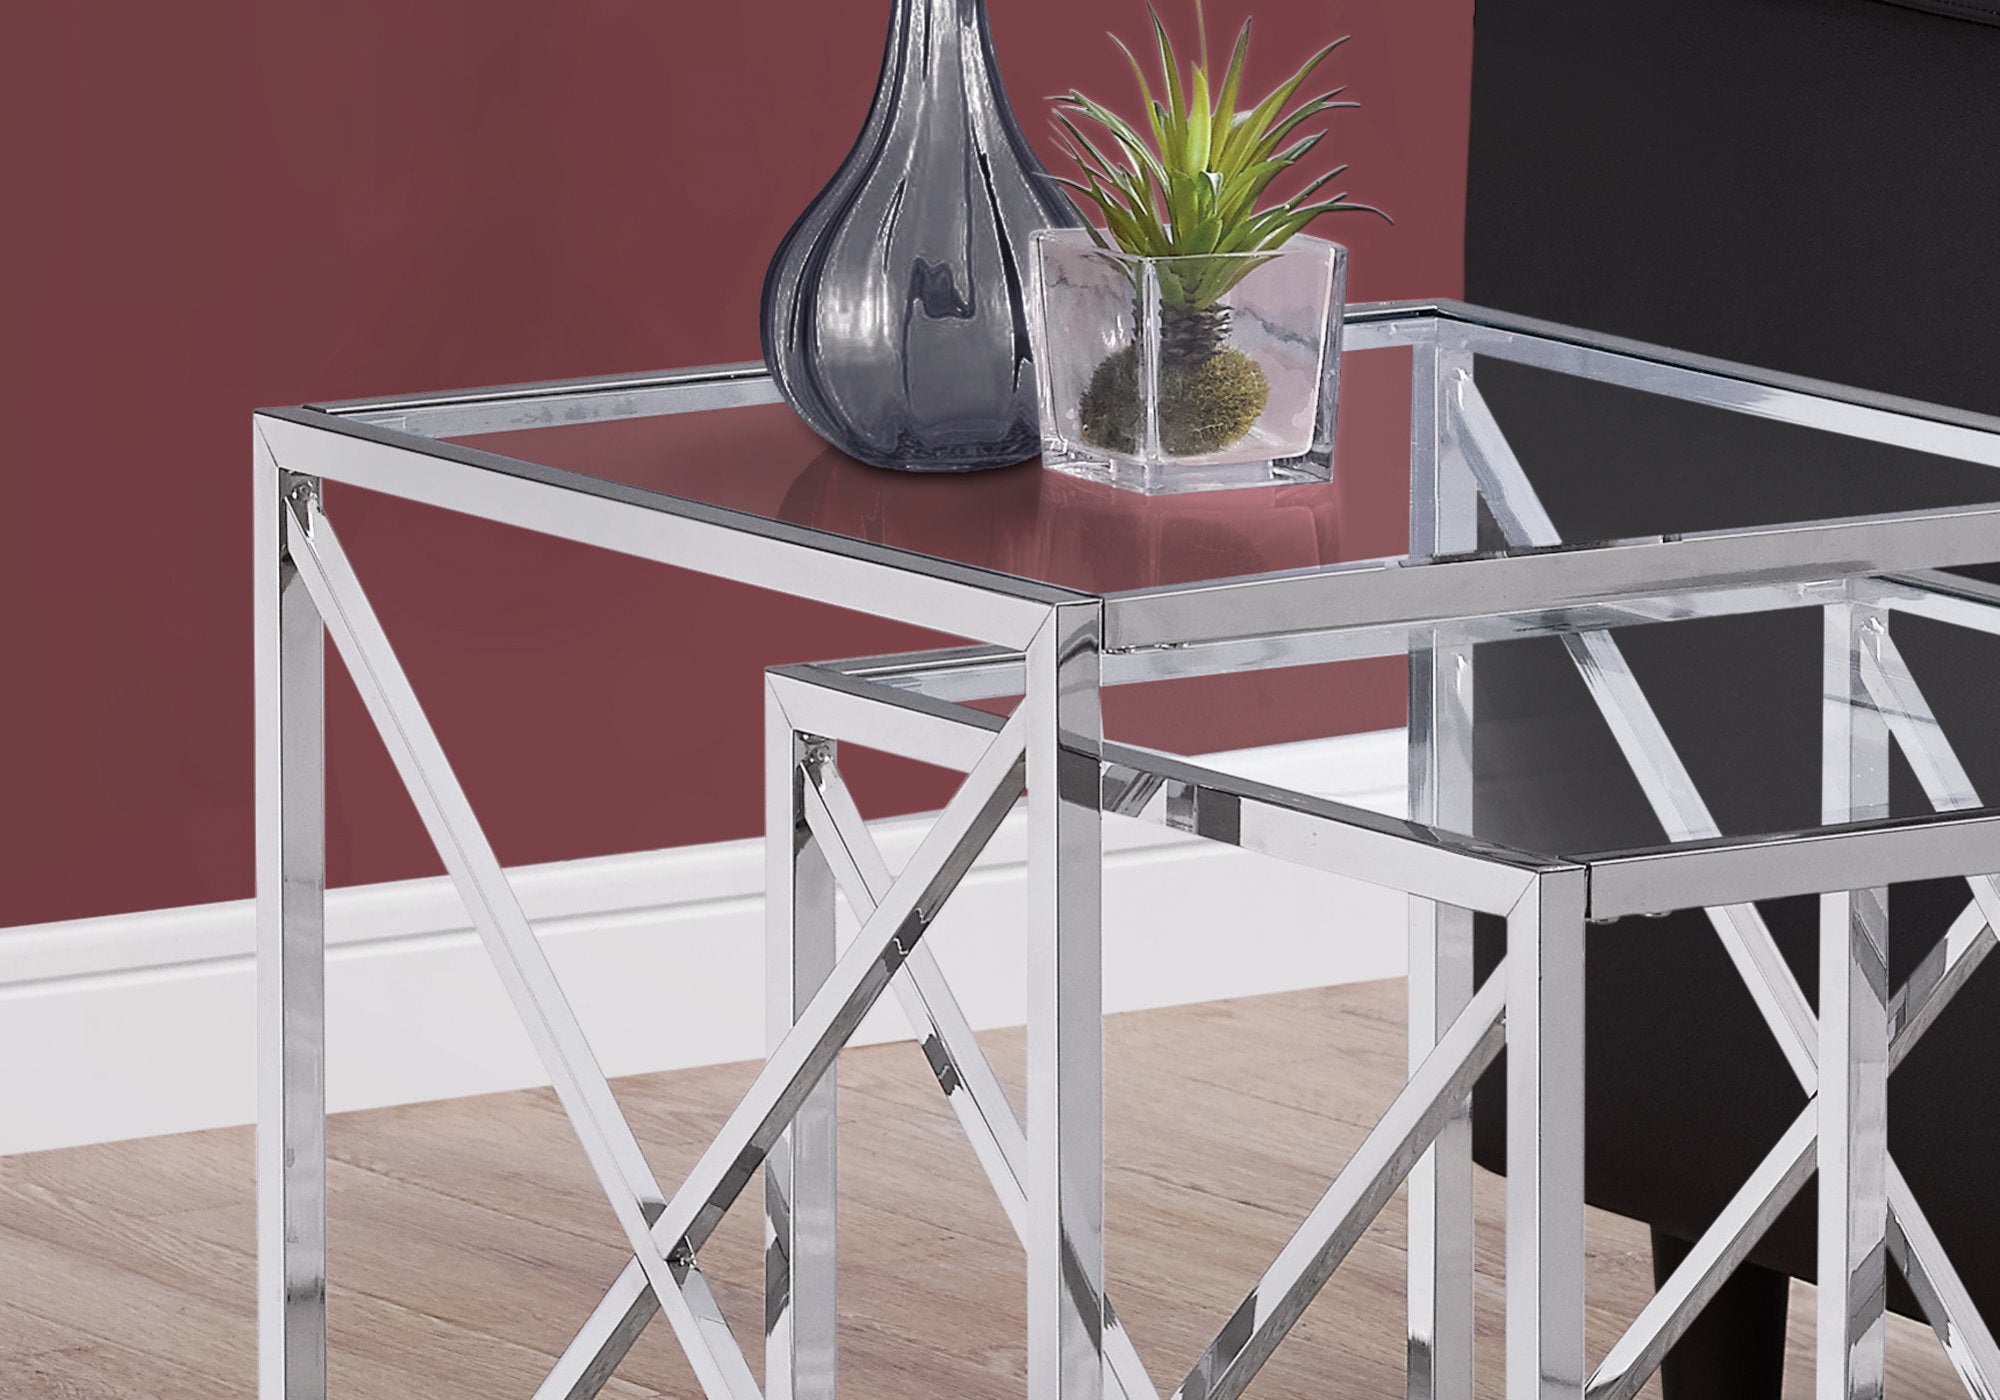 MN-633441    Nesting Table, Set Of 2, Side, End, Tempered Glass, Accent, Living Room, Bedroom, Metal Base, Tempered Glass, Chrome, Clear, Contemporary, Modern